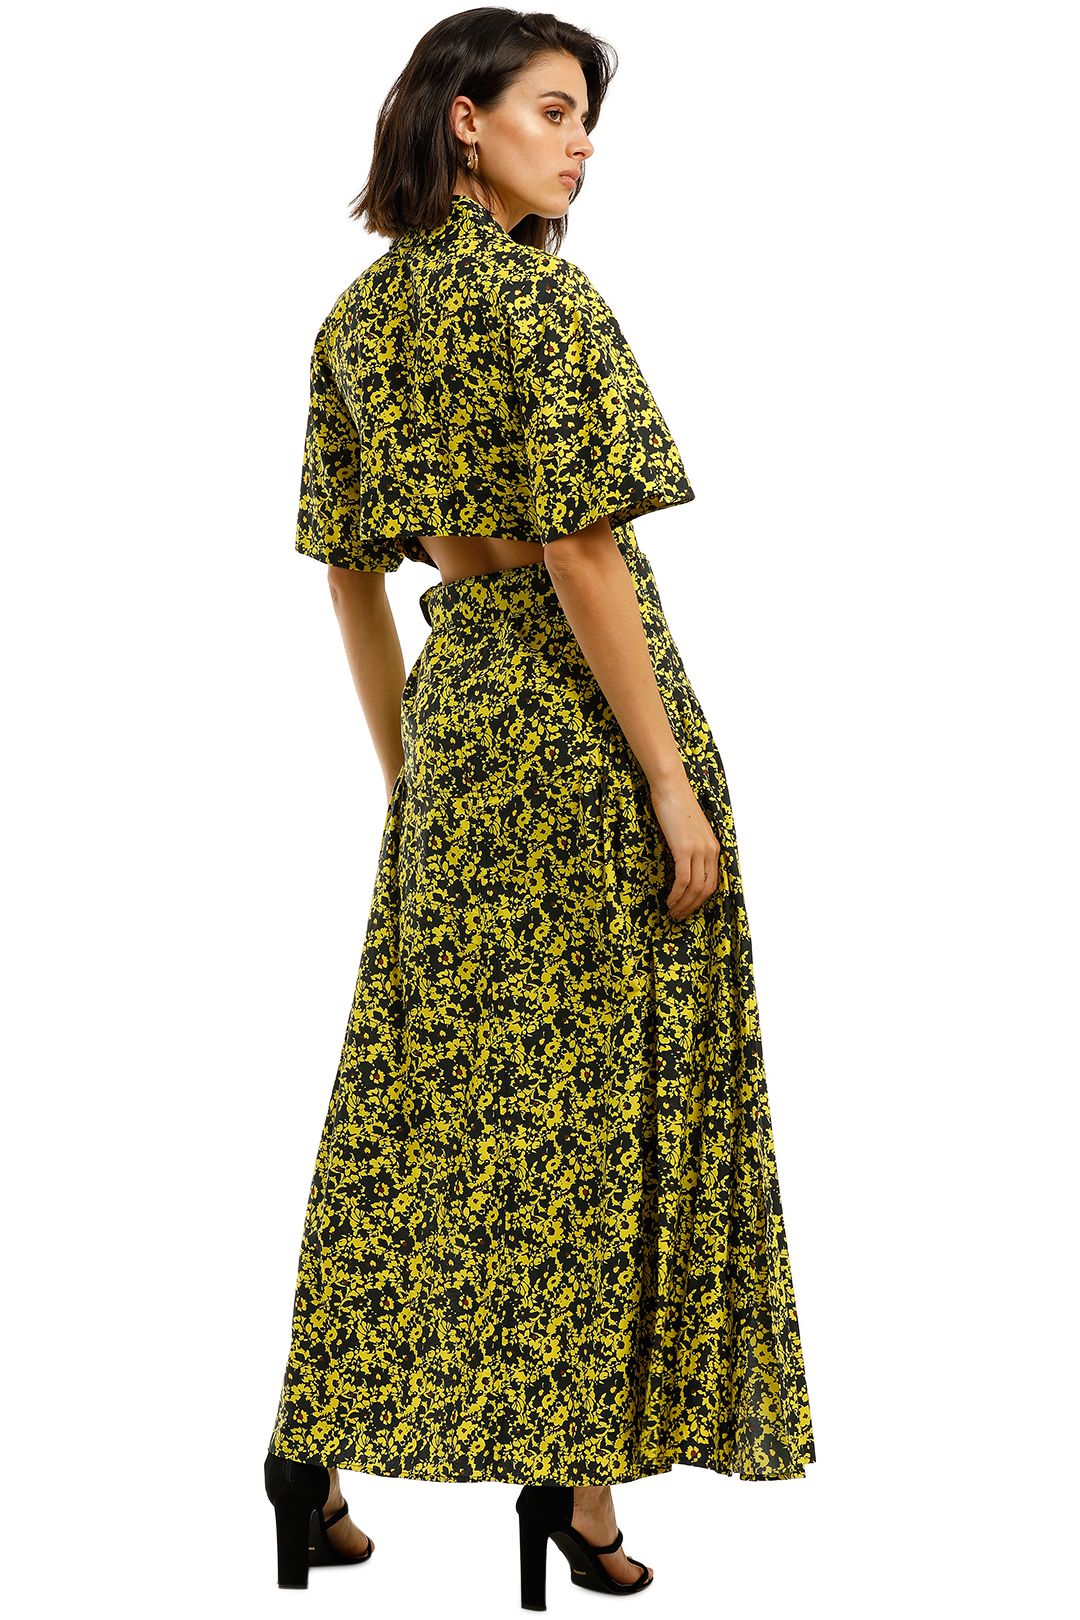 Camilla-and-Marc-Monet-Dress-Yellow-Back